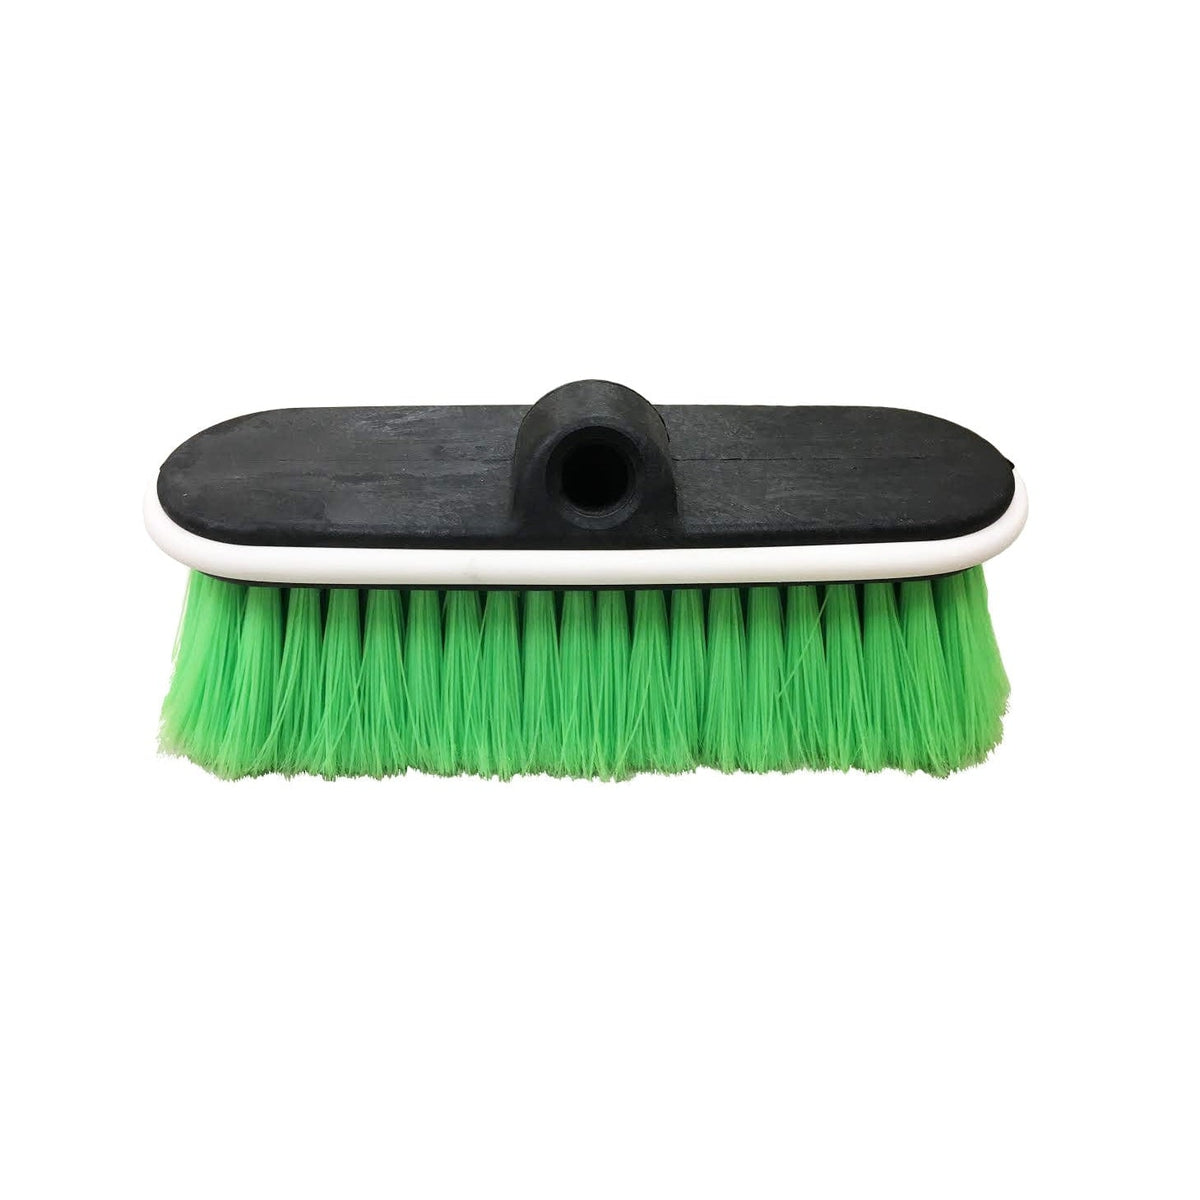 Easy Reach Qualifies for Free Shipping Easy Reach Extra Soft Green Nyltex Wash Brush with Bumper 9.5" #197-B